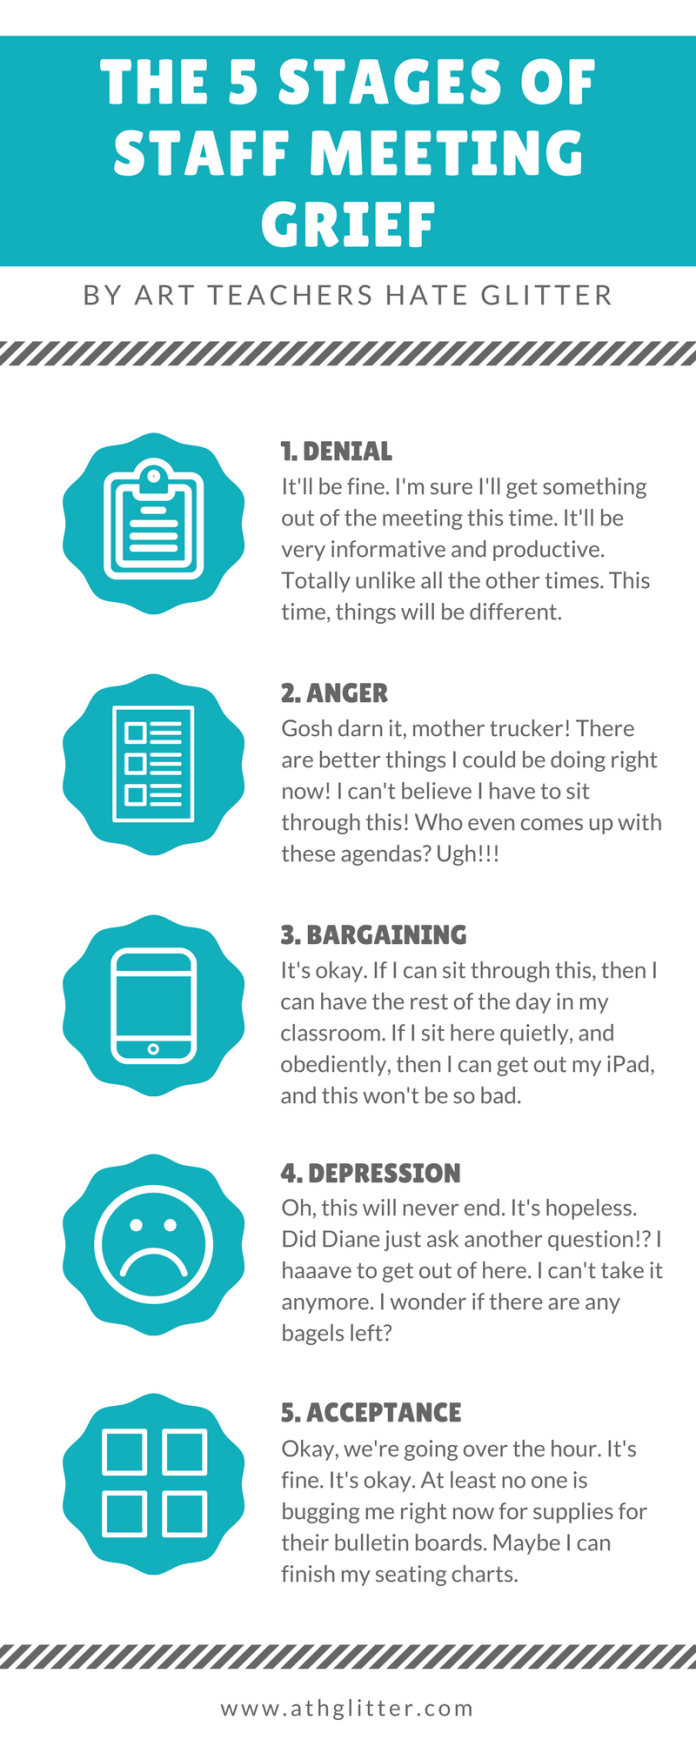 The 5 Stages of Staff Meeting Grief www.athglitter.com